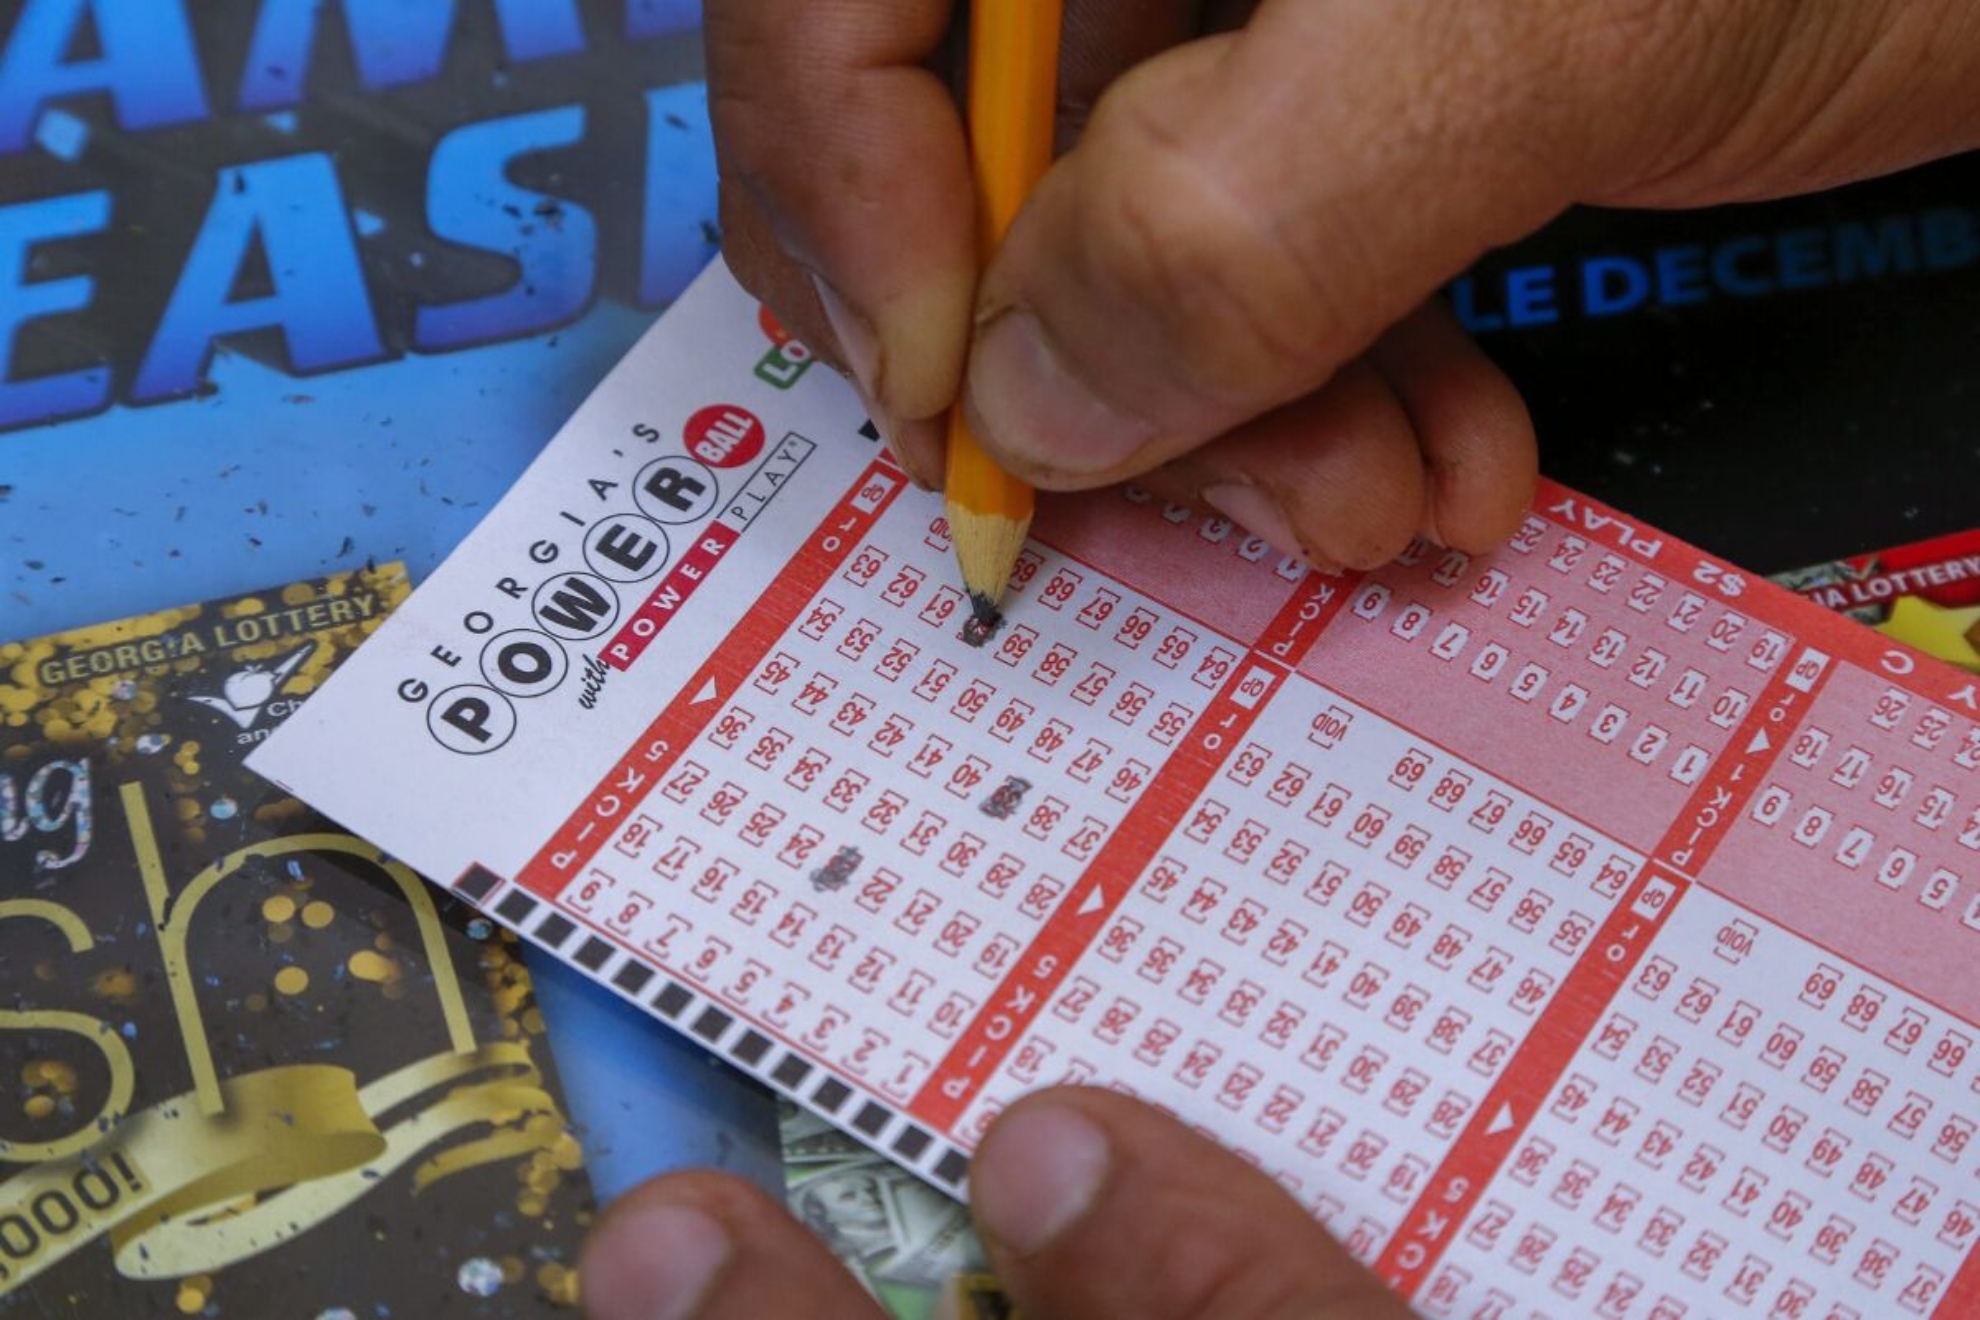 The Powerball numbers have been drawn! Cross your fingers and check your ticket - you might just be holding the key to the grand prize!